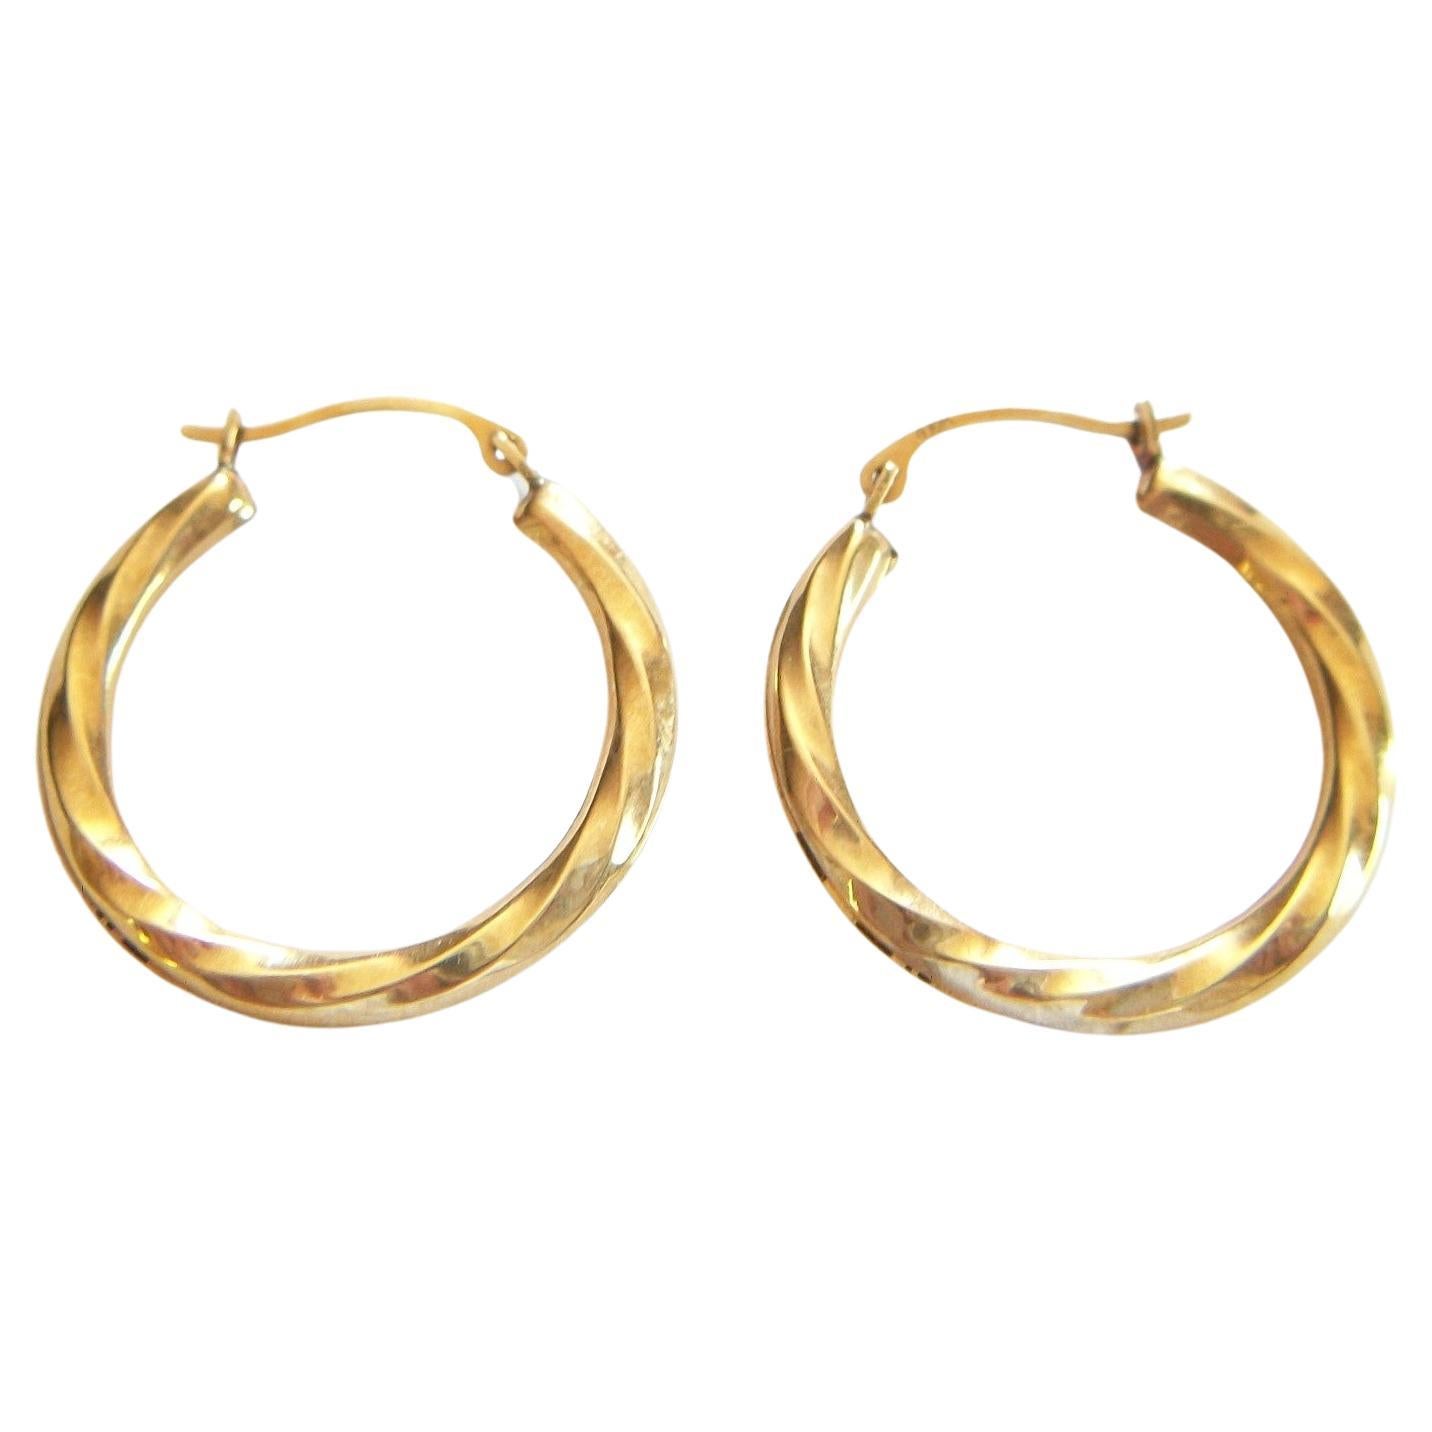 Vintage 10k Yellow Gold Twisted Hoop Earrings, Signed, U.S.A., circa 1980s For Sale